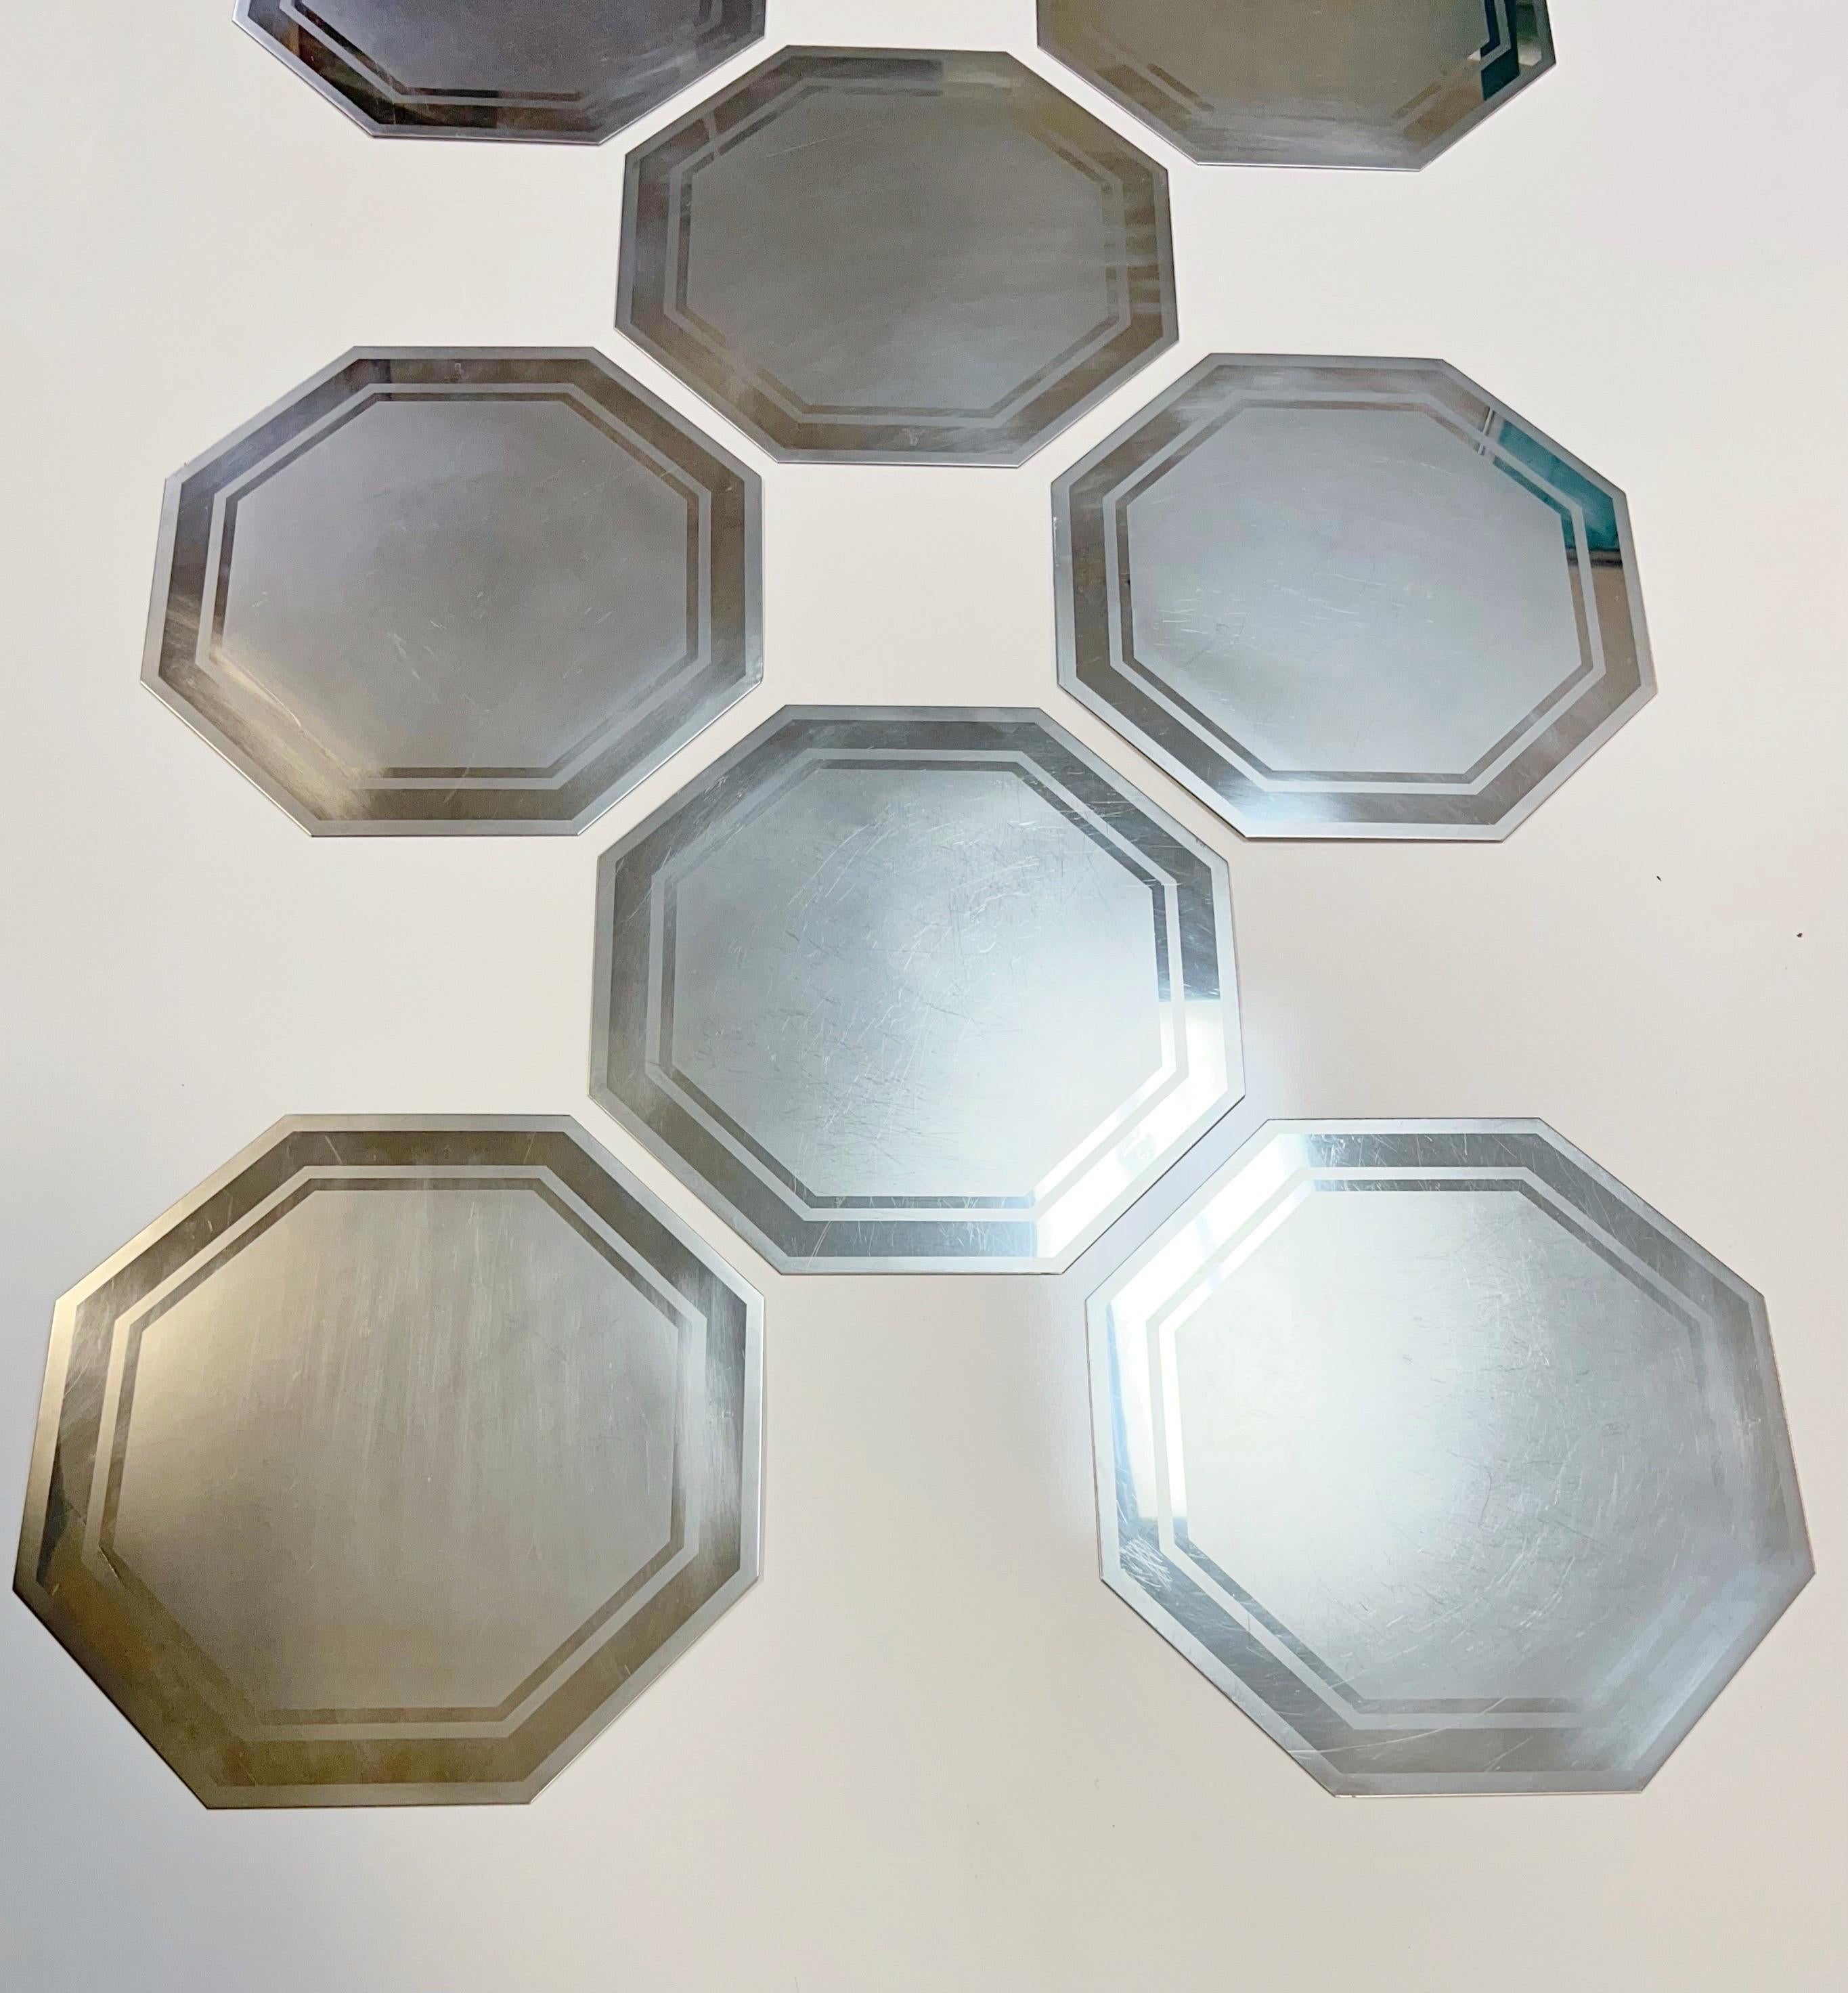 A rare set of 8 modern placemats by Romeo Rega. Octagonal in shape. The surface has a geometric design in polished stainless and mate. All are signed. In good condition showing scuffing from age and use.